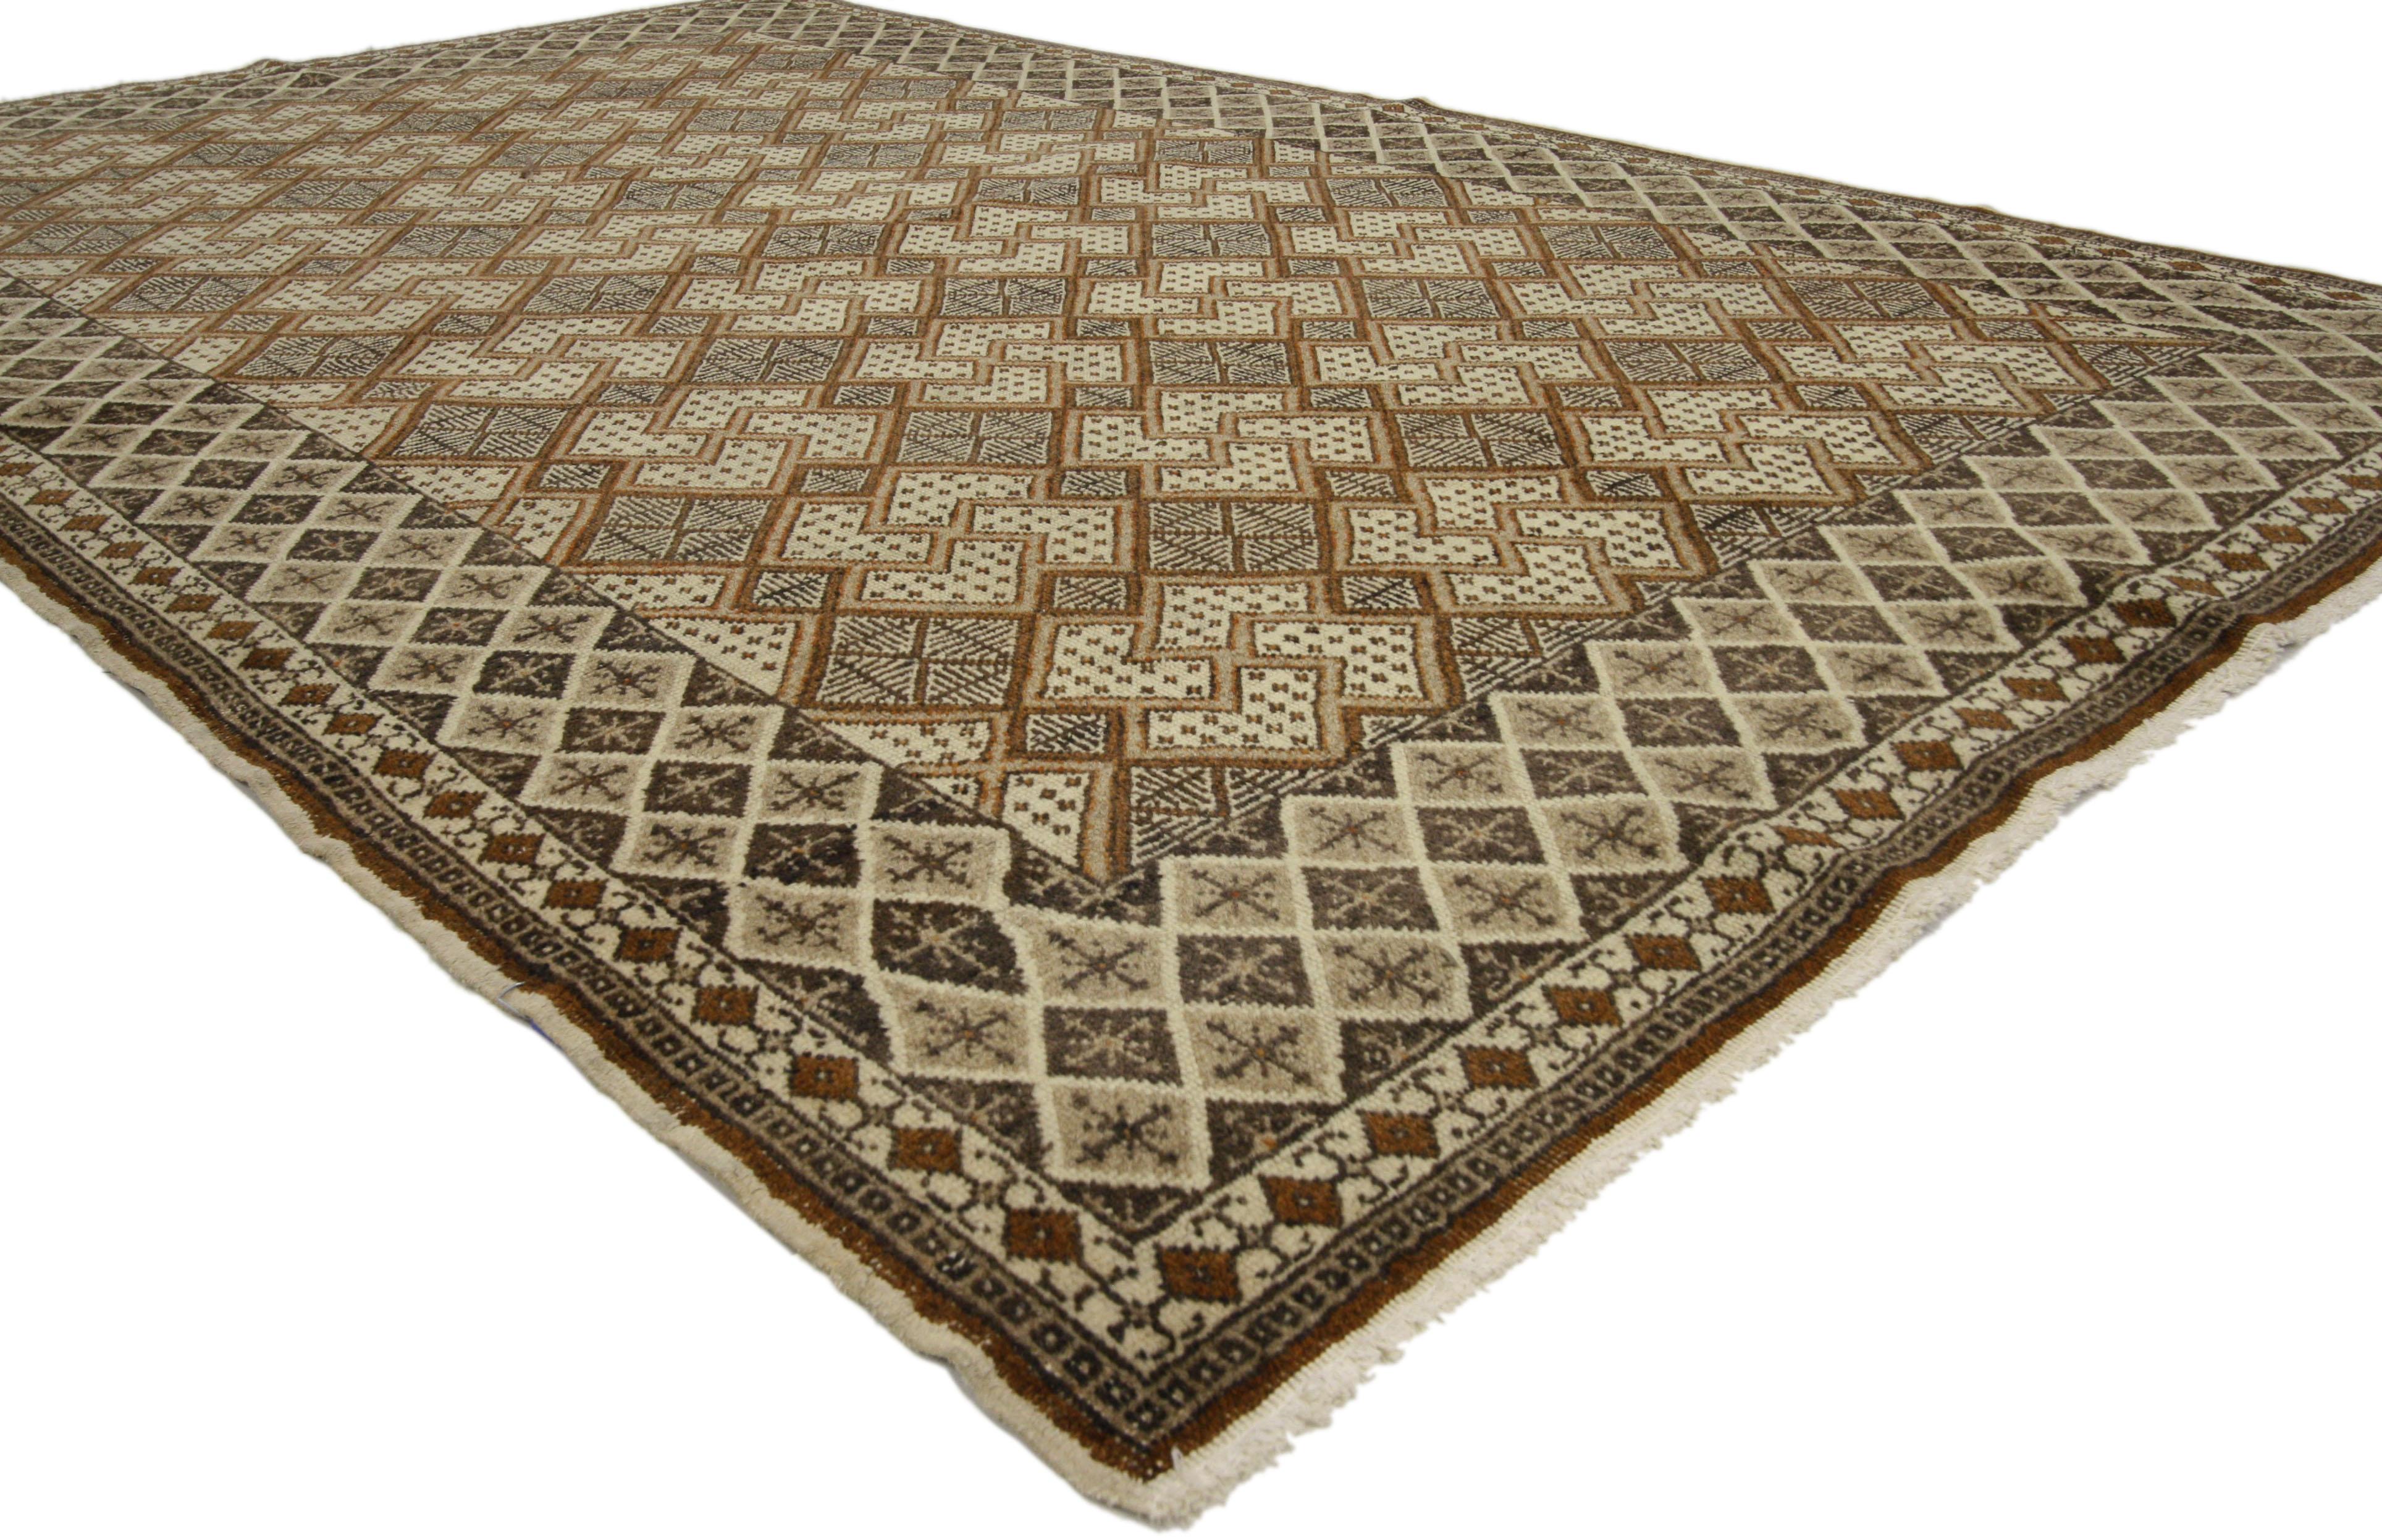 50069 Vintage Turkish Oushak with Mid-Century Modern Style. This hand-knotted wool vintage Turkish Oushak rug with Mid-Century Modern style features an all-over geometric pattern. The modest field tastefully complements the main border. The